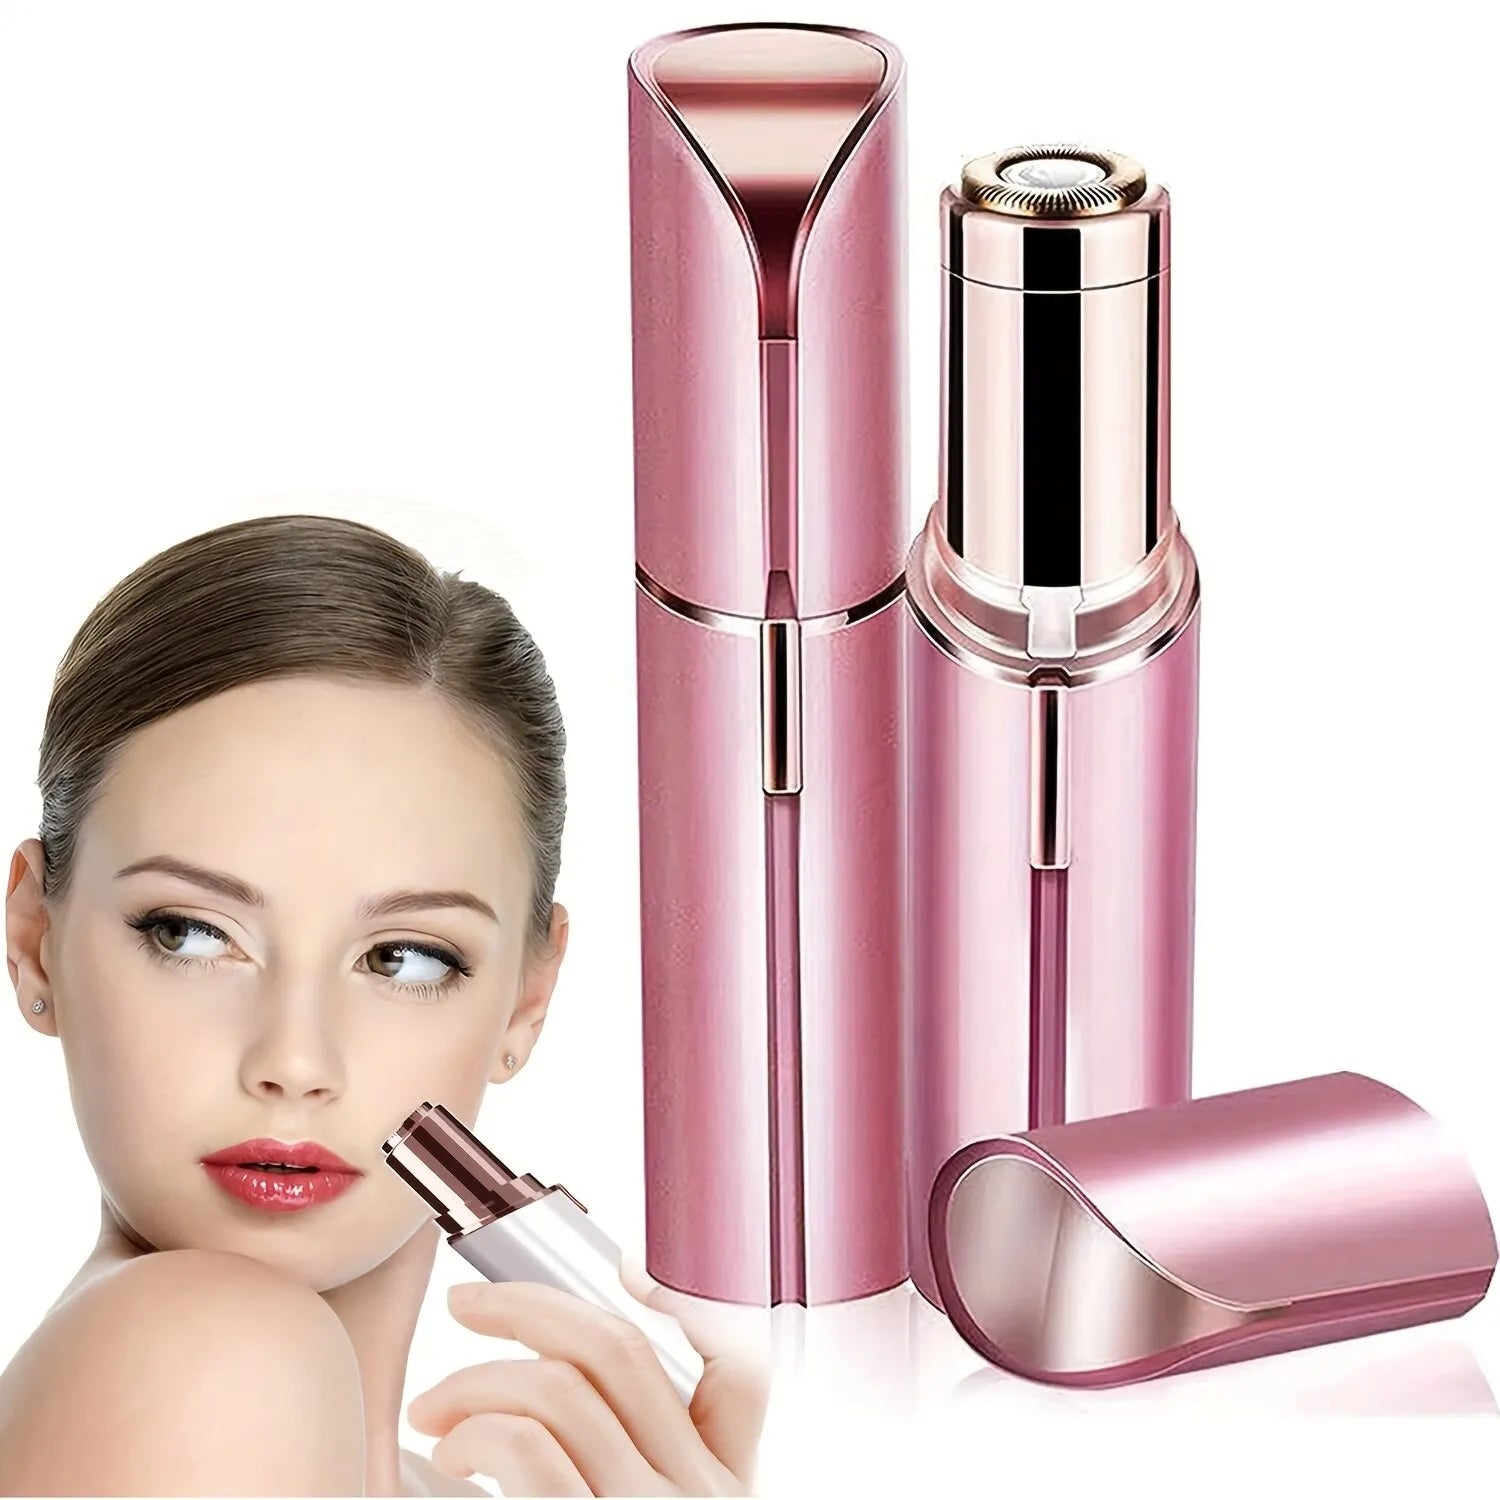 Portable Lipstick Shaped Electric Hair Remover - easynow.com